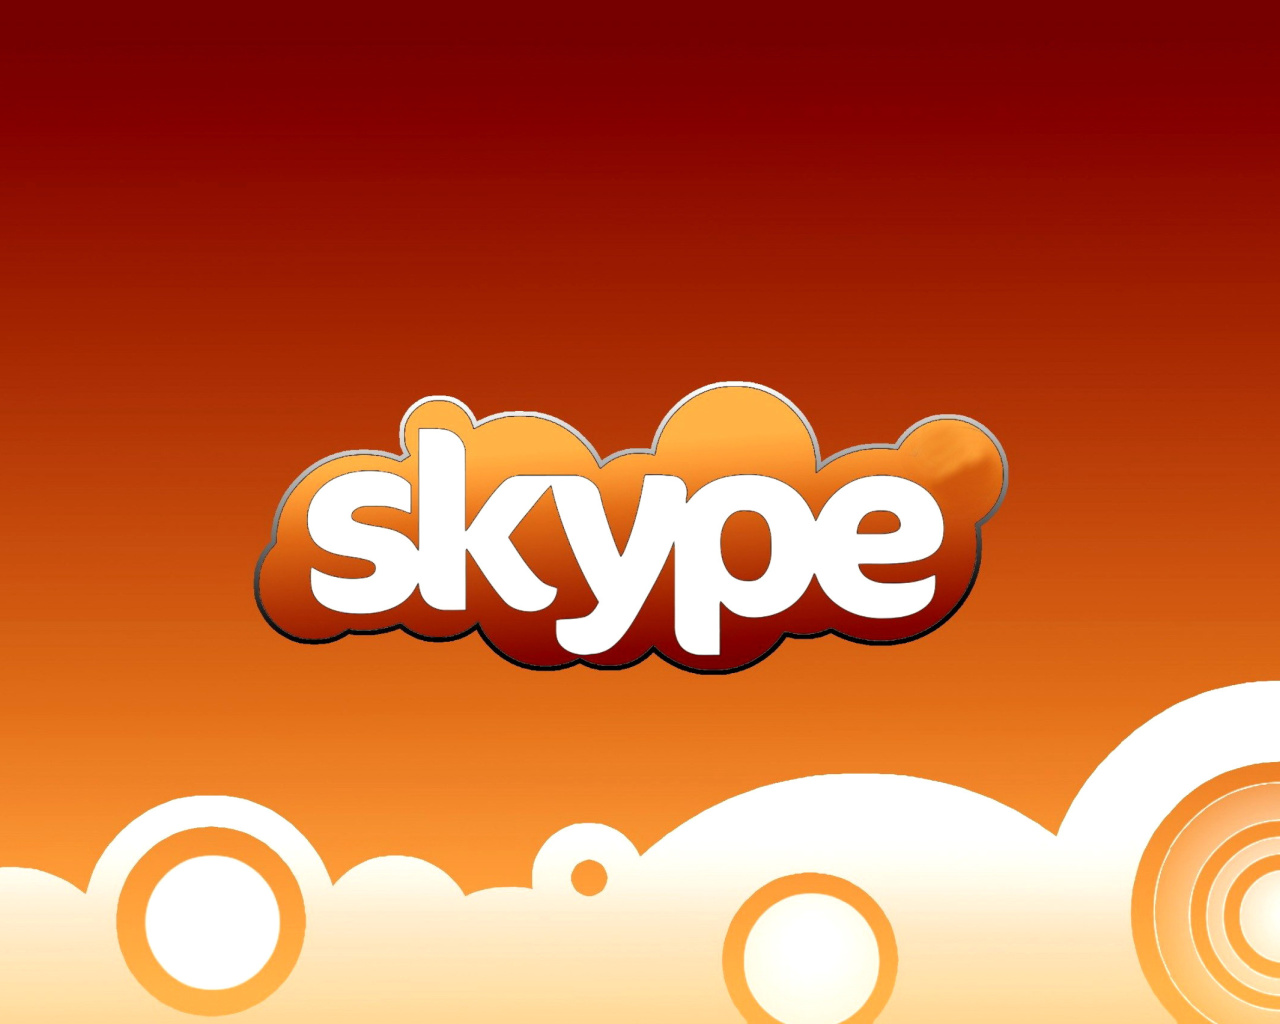 Sfondi Skype for calls and chat 1280x1024